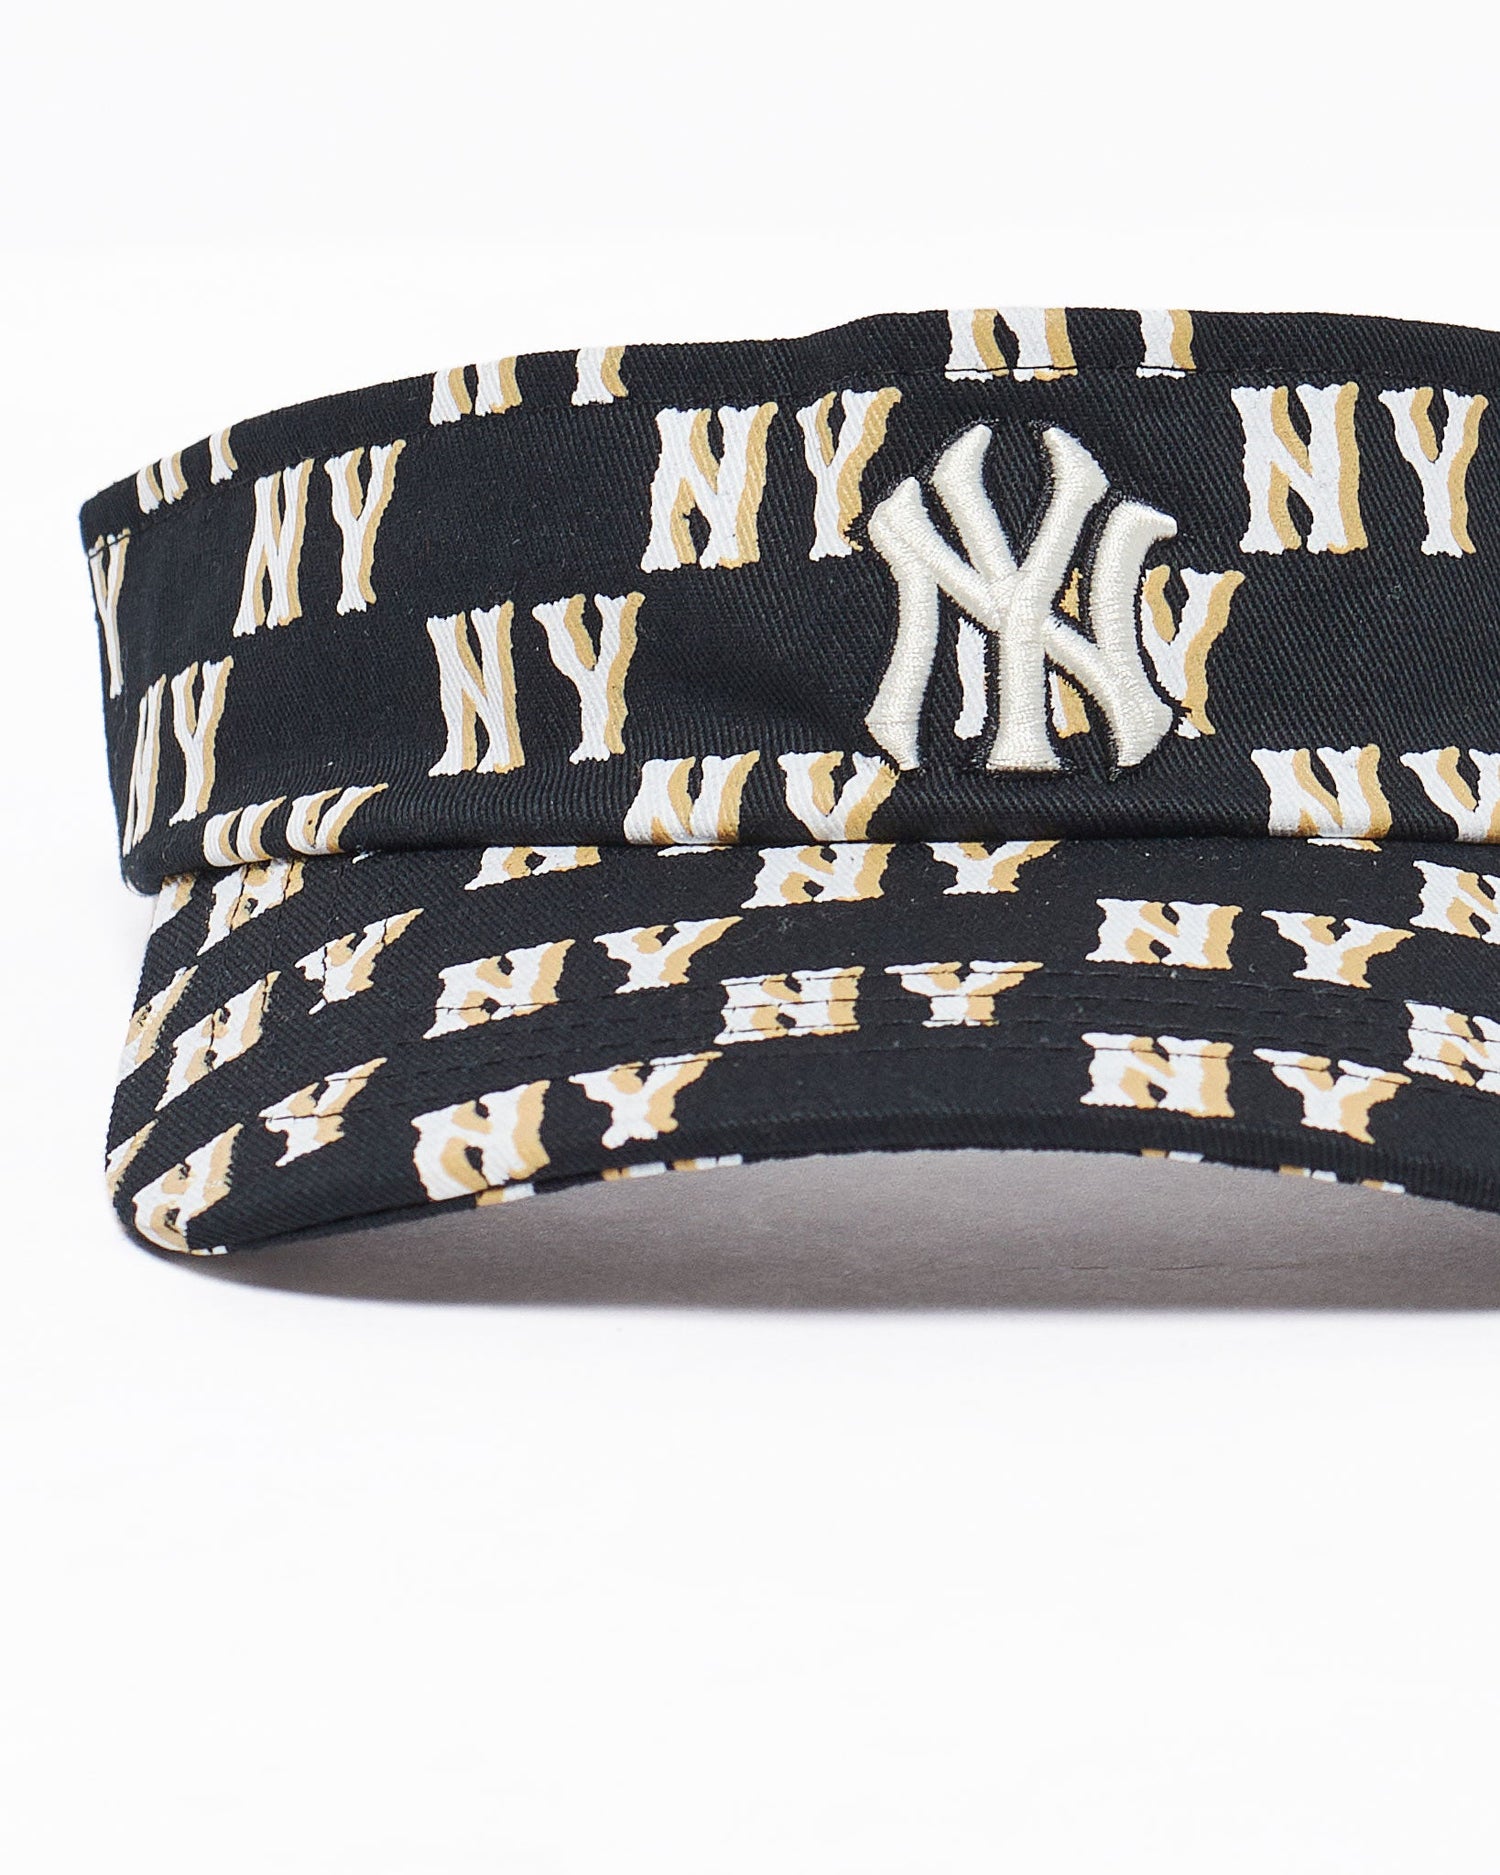 MOI OUTFIT-NY Logo Embroidered Unisex Half Cap 9.90